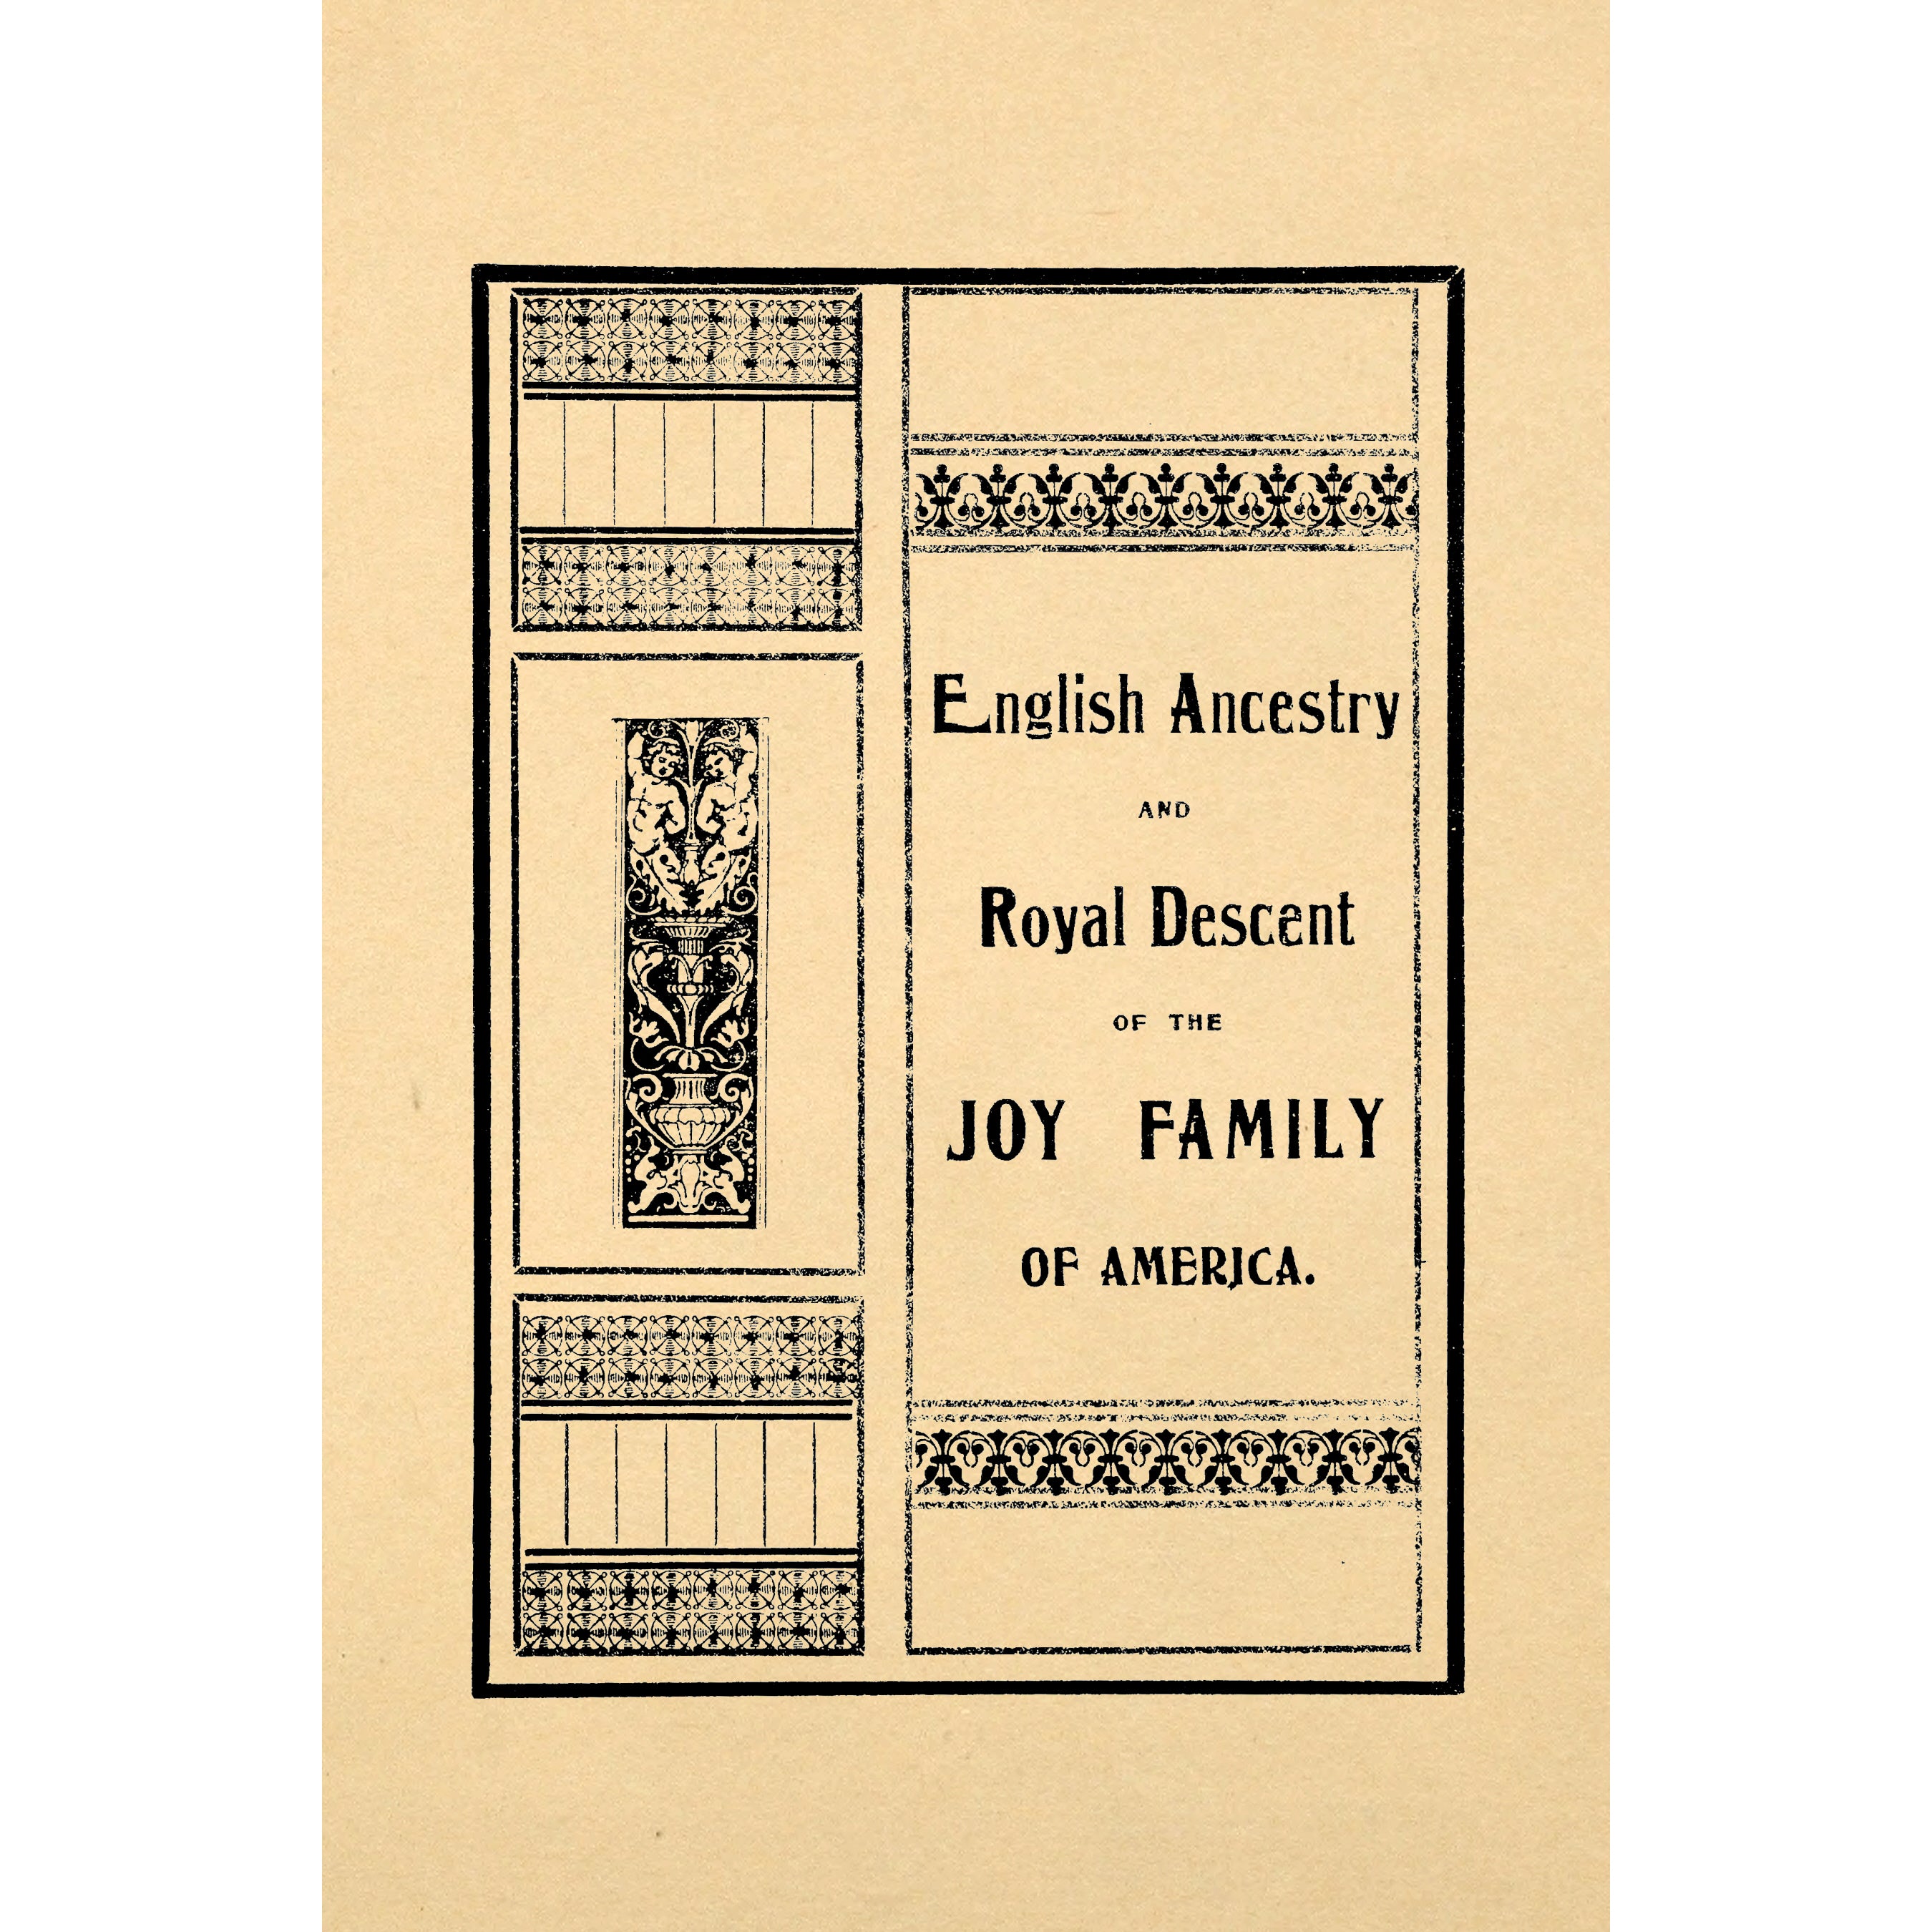 English ancestry and royal descent of the Joy family of America